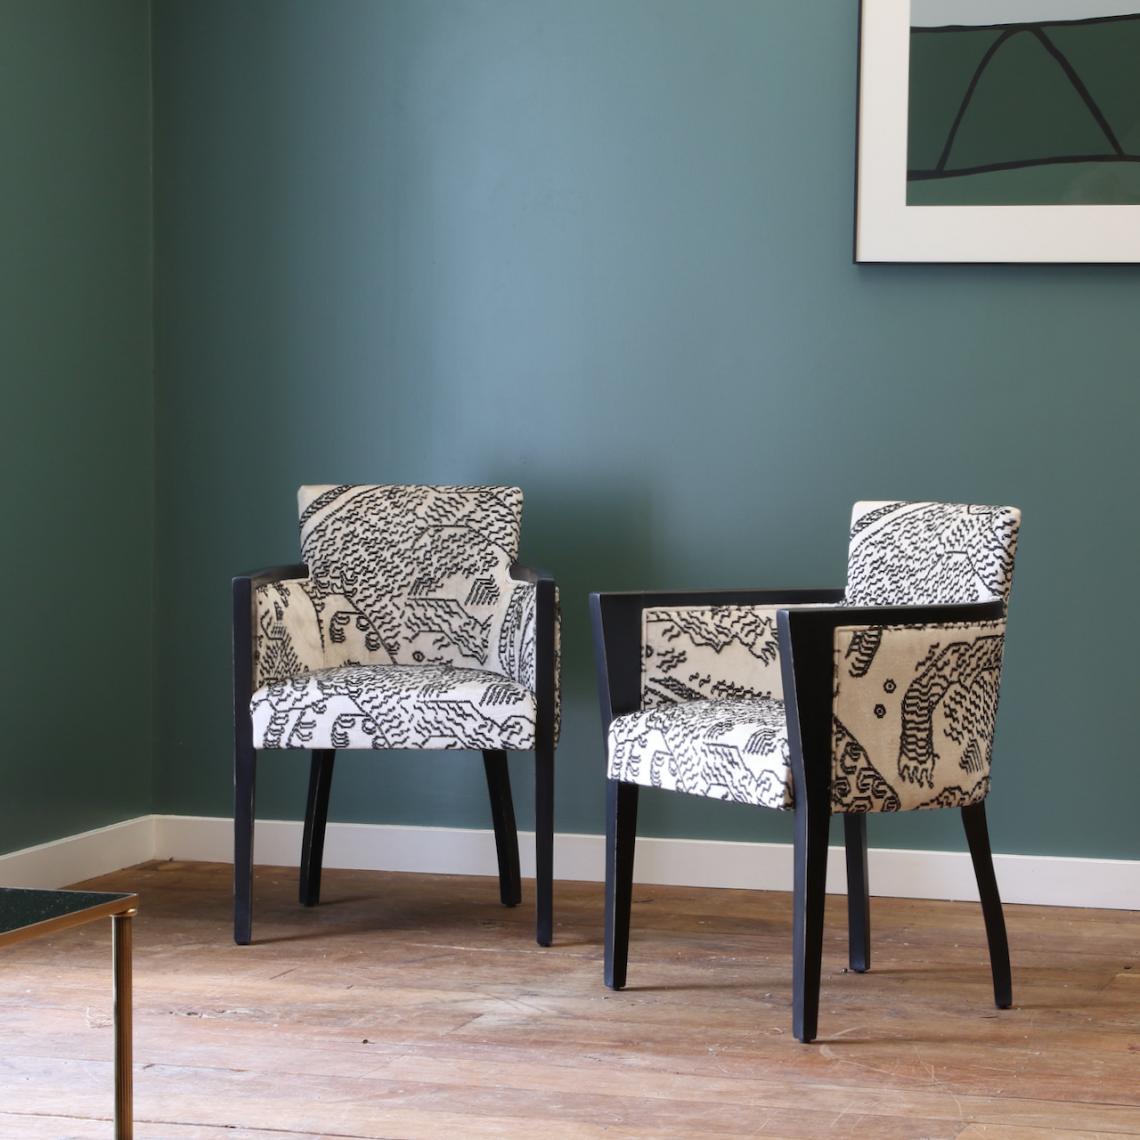 120-38 - Art Deco Chairs// JS Editions